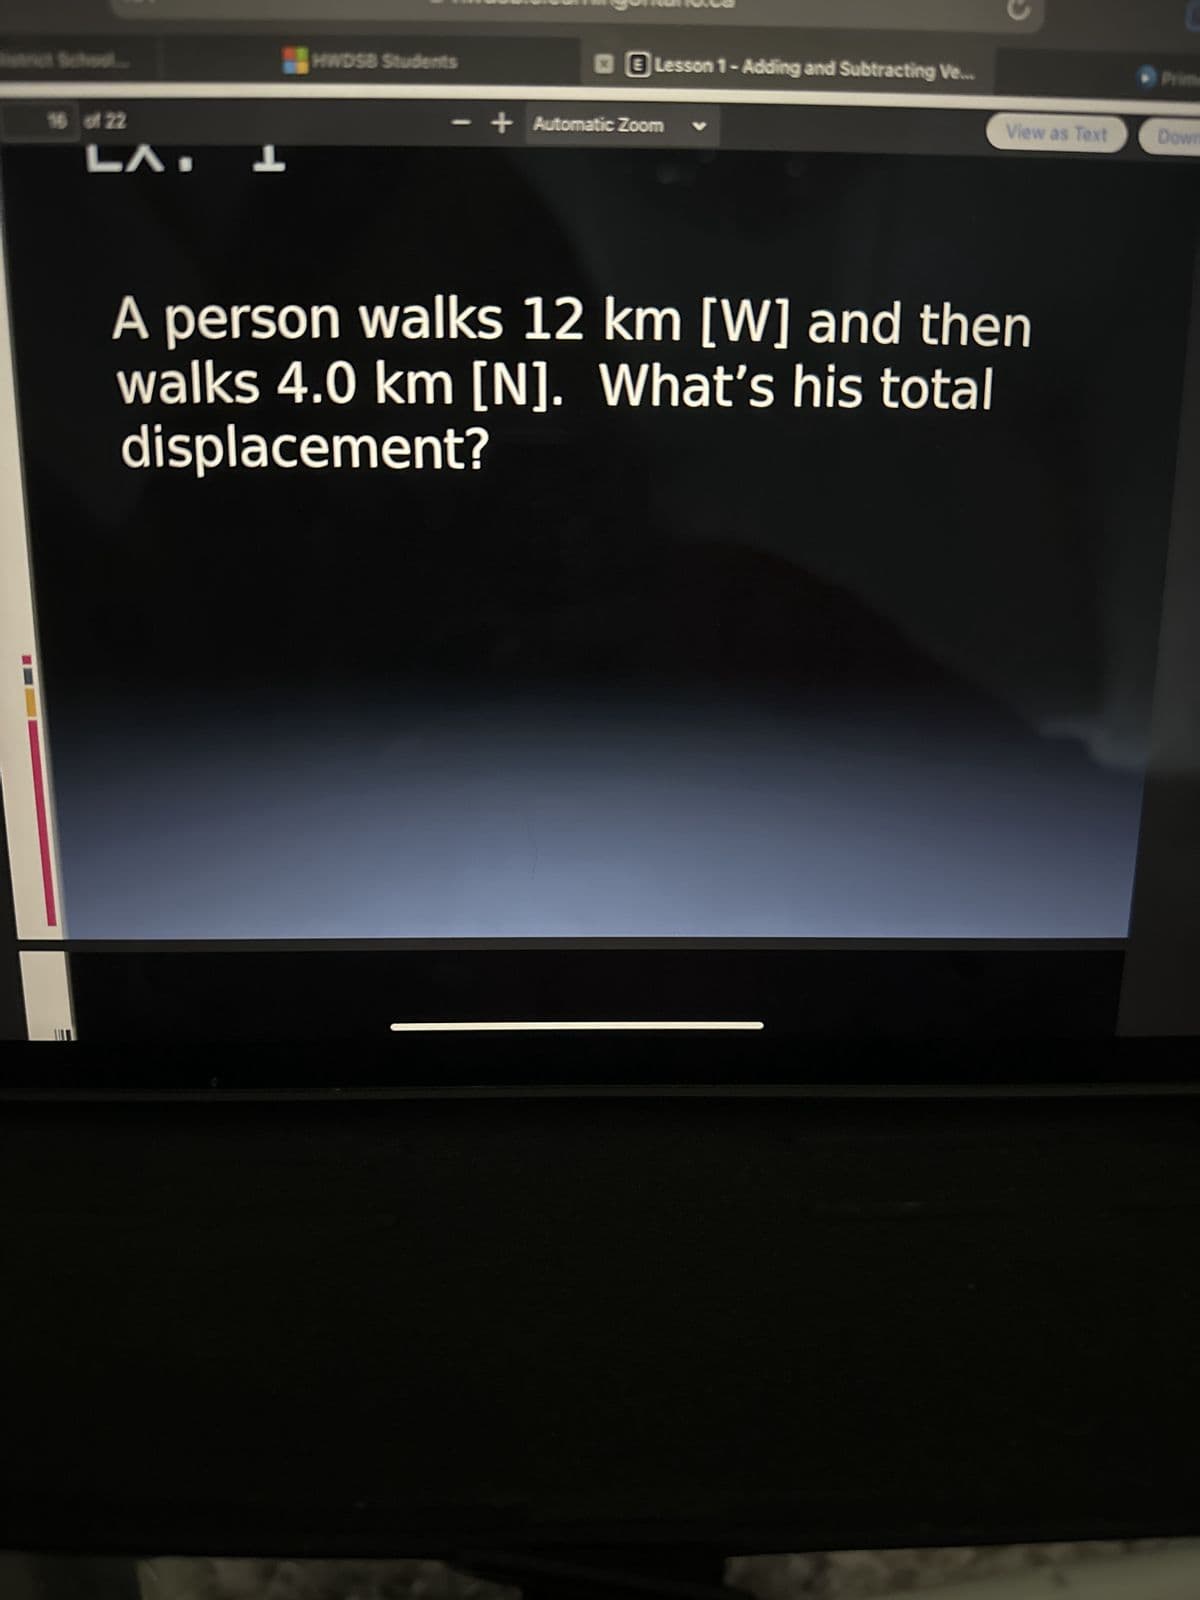 hool.
16 of 22
LA. L
HWDSB Students
Lesson 1- Adding and Subtracting Ve...
- + Automatic Zoom V
C
View as Text
A person walks 12 km [W] and then
walks 4.0 km [N]. What's his total
displacement?
Down